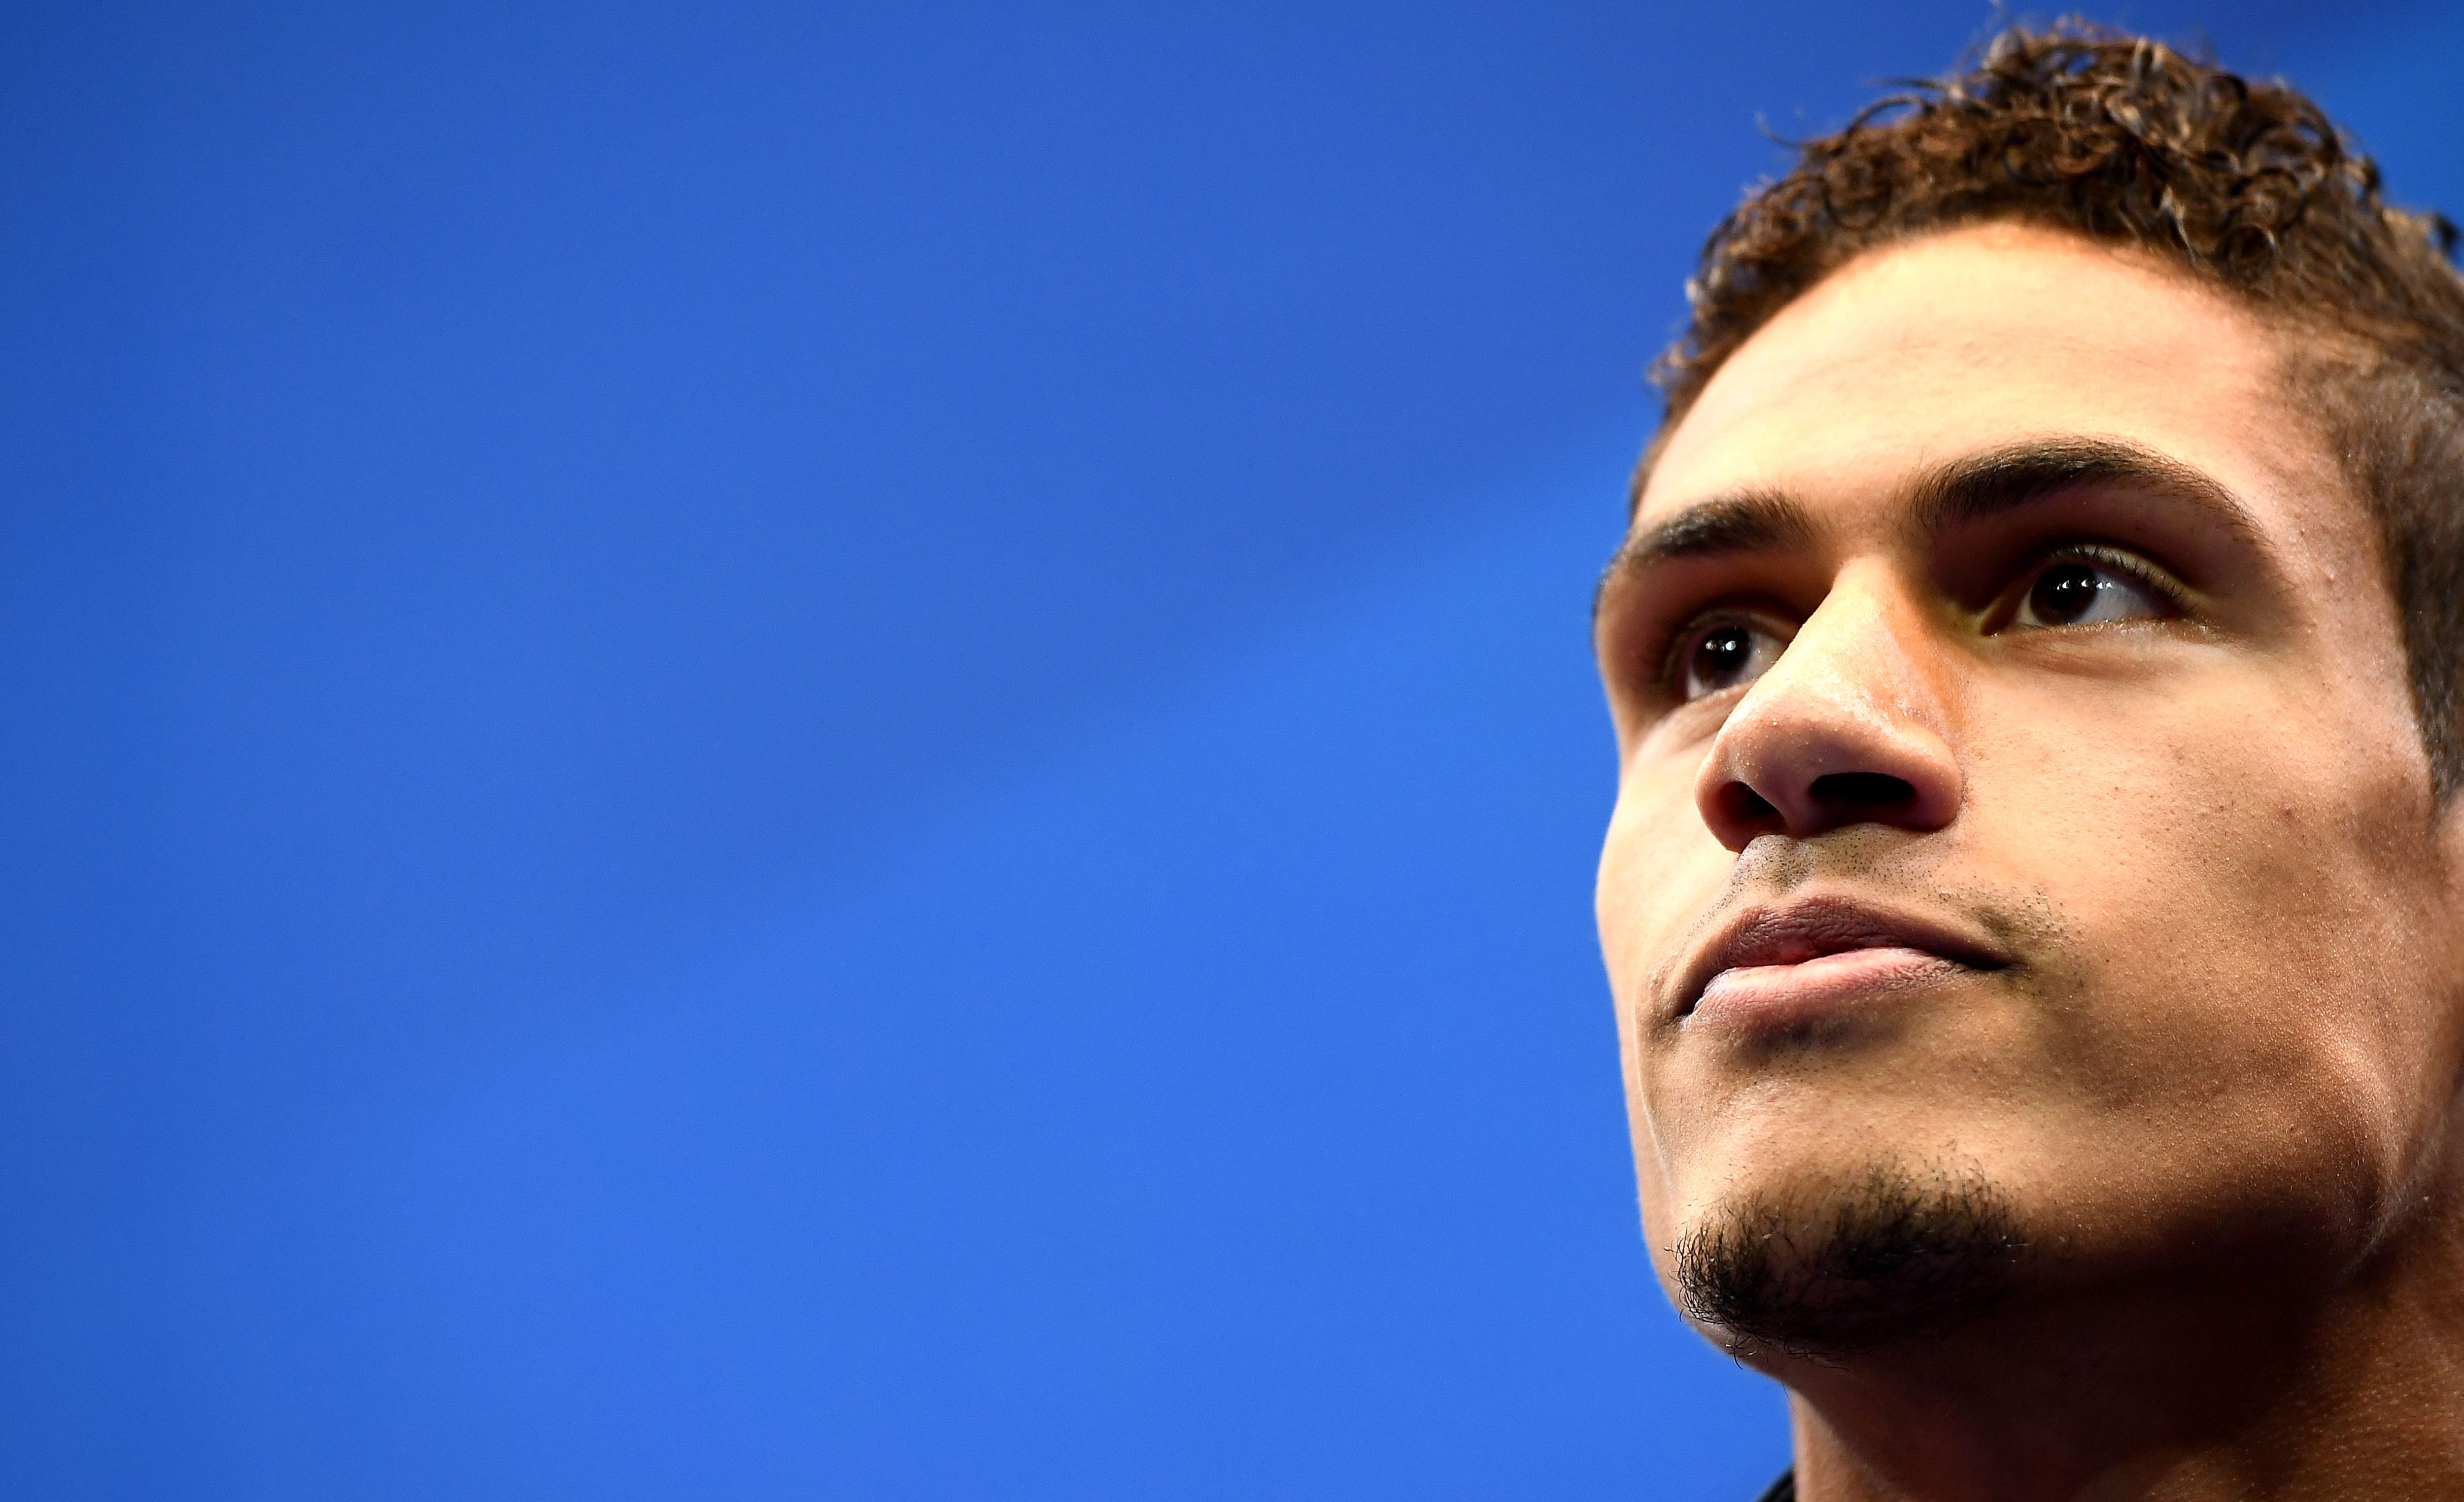 France's defender Raphael Varane gives a press conference in Clairefontaine en Yvelines on June 6, 2017 as part of the team's preparation for the upcoming World Cup 2018 qualifier football match against Sweden on June 9.   / AFP PHOTO / FRANCK FIFE        (Photo credit should read FRANCK FIFE/AFP/Getty Images)